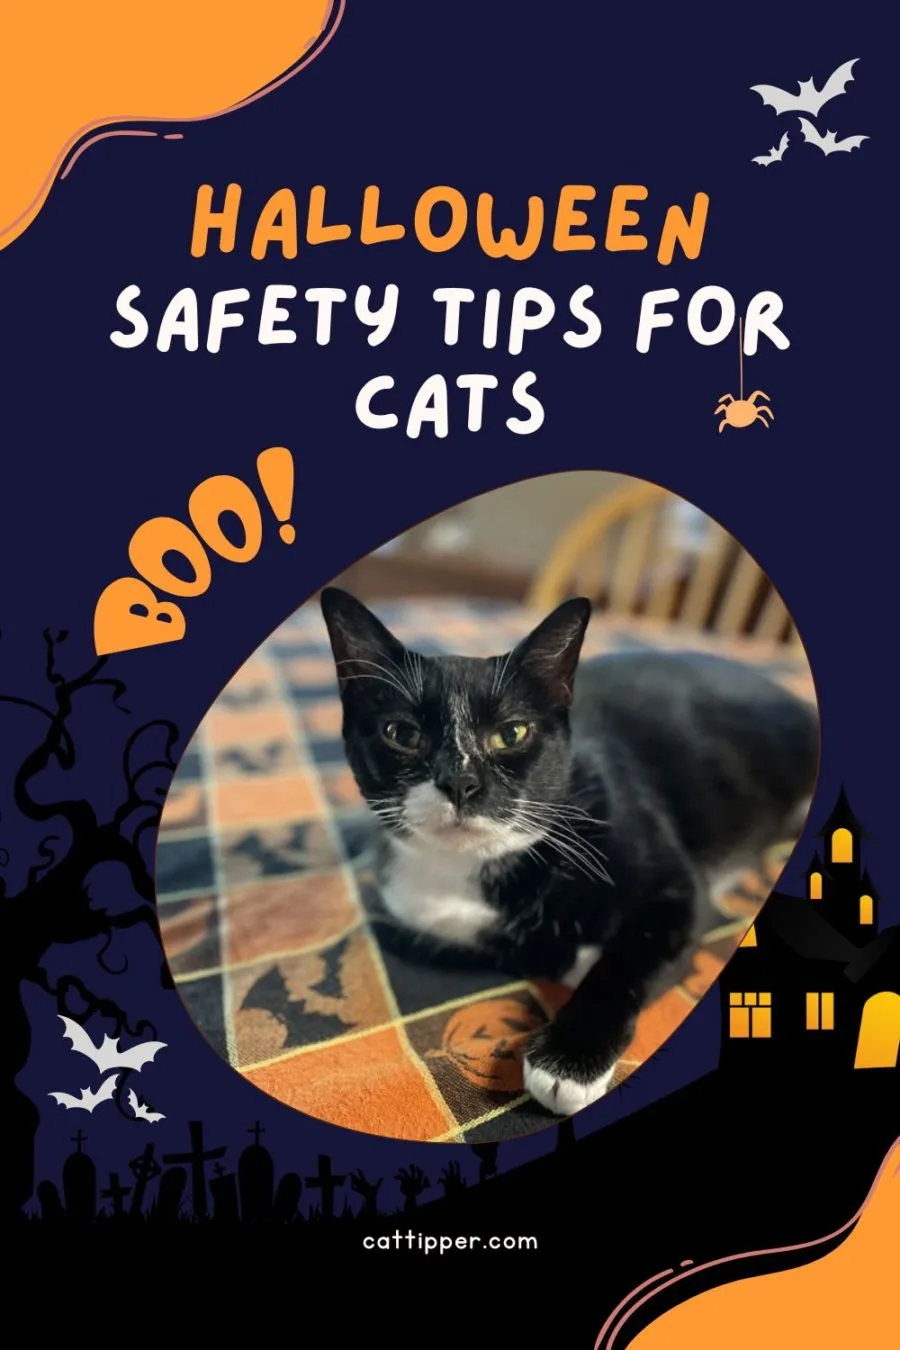 Halloween safety tips for cats